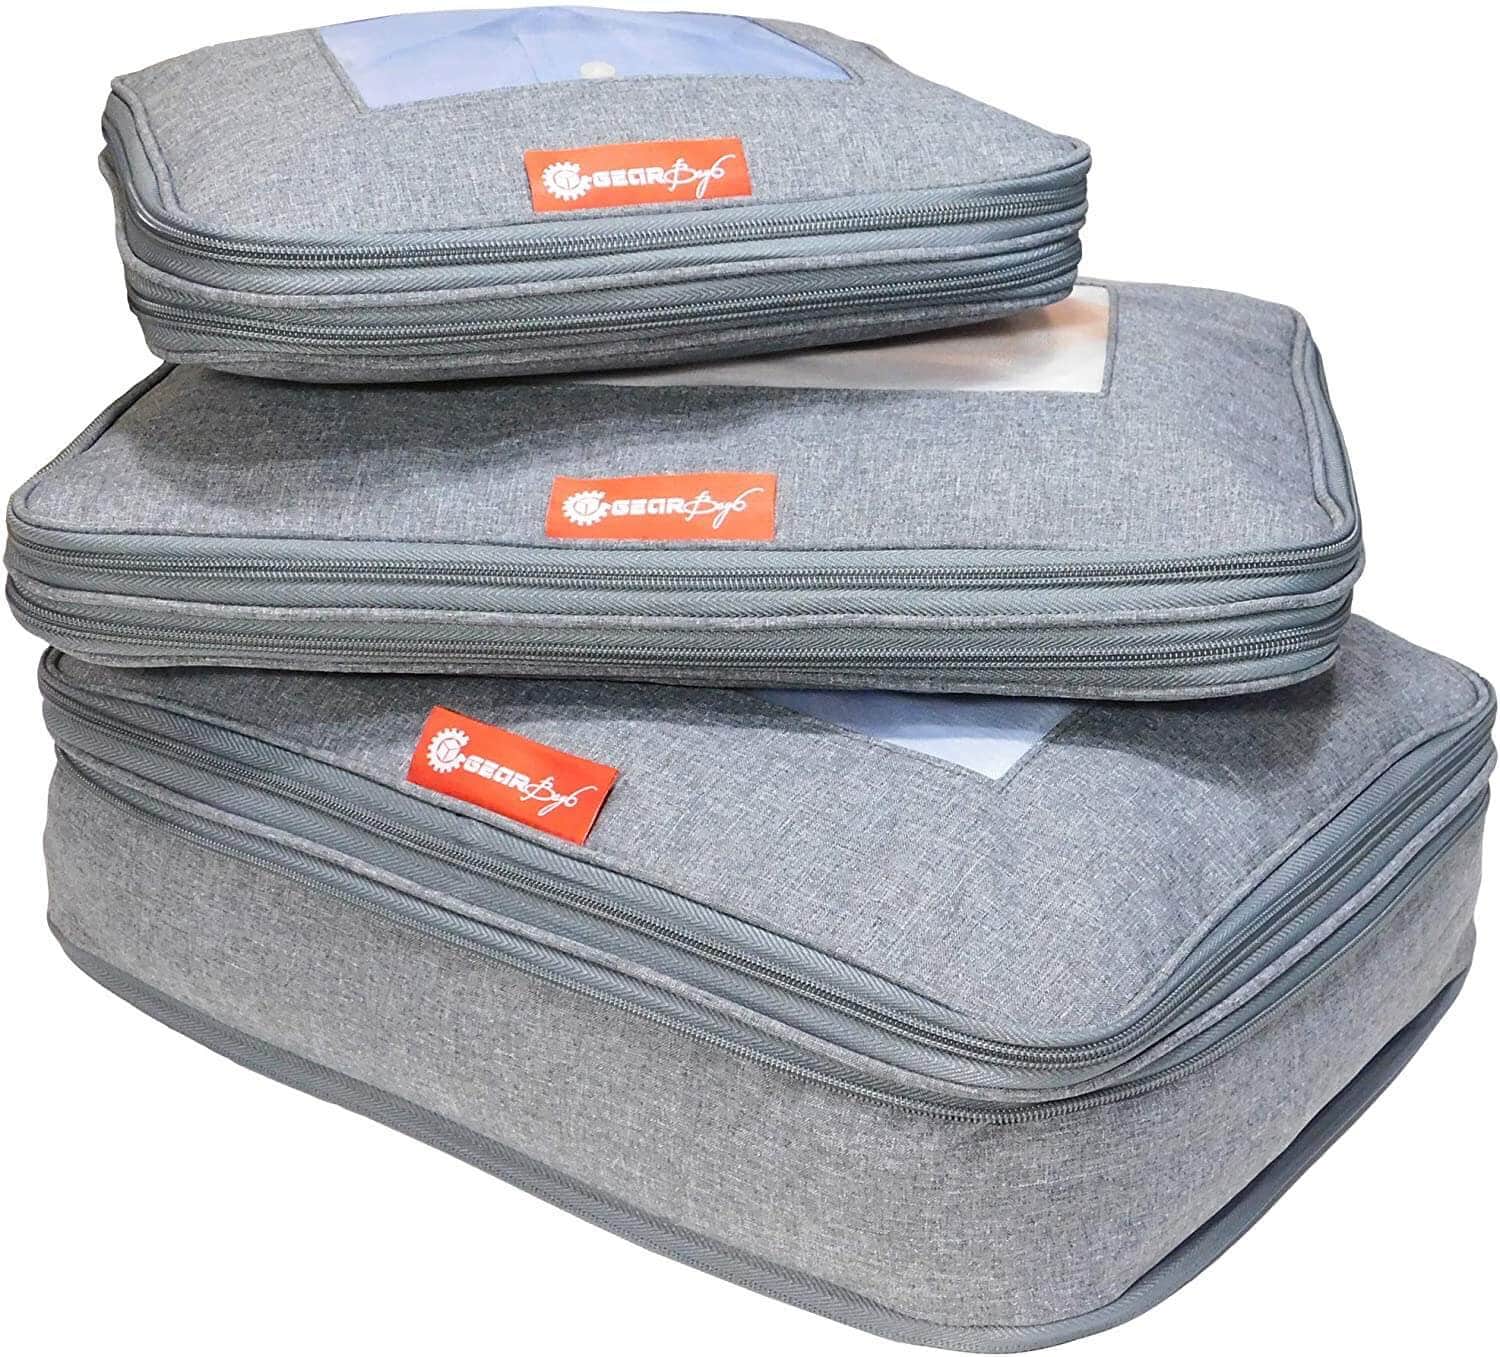 3 grey Compression packing cubes stacked 